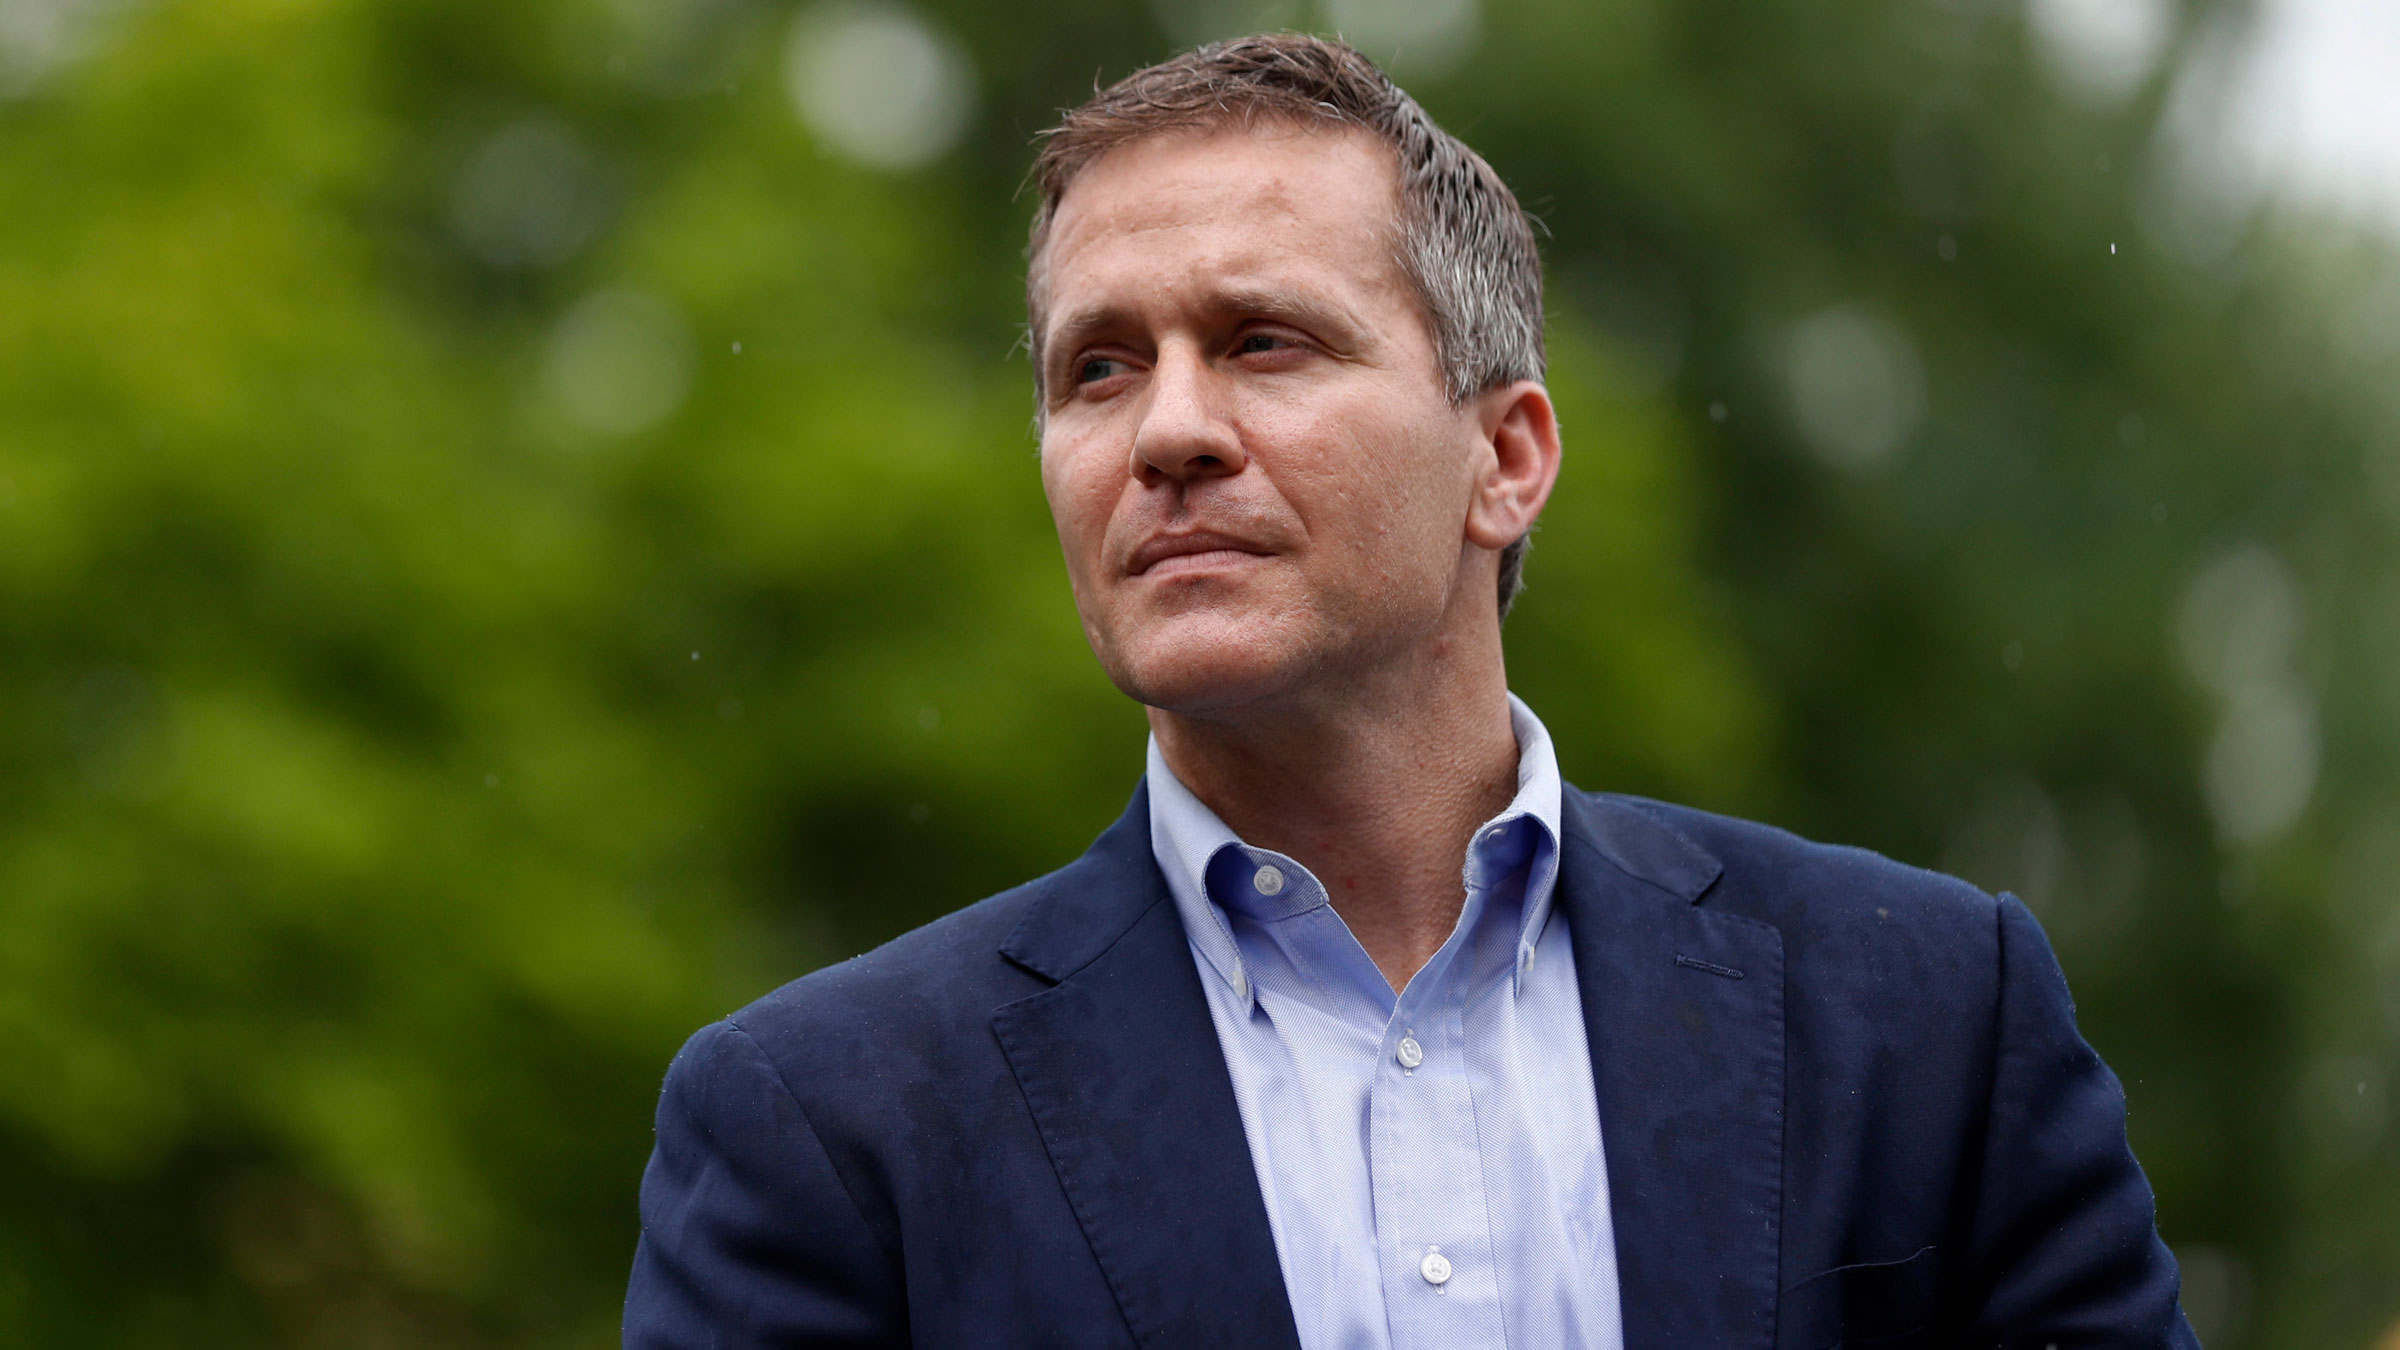 Former Missouri Gov. Eric Greitens, seen here in May 2018, is now running for a seat in the US Senate.